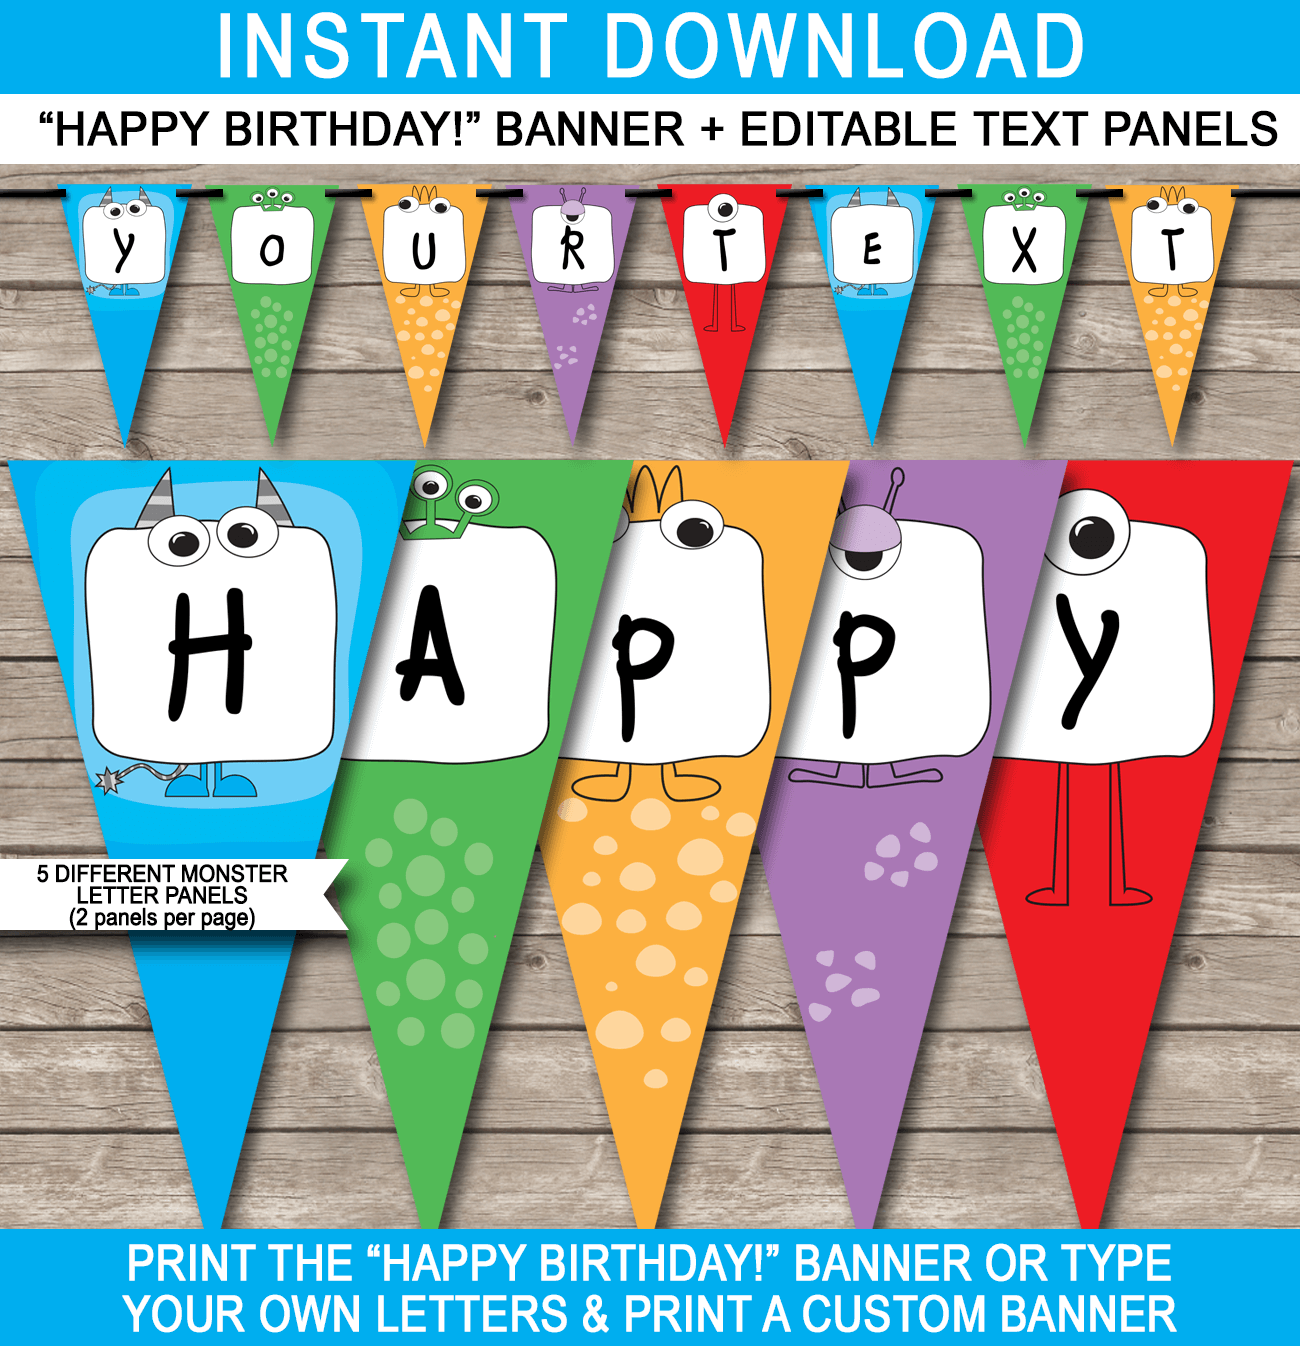 Monster Party Banner Template - Monster Bunting - Happy Birthday Banner - Birthday Party - Editable and Printable DIY Template - INSTANT DOWNLOAD $4.50 via simonemadeit.com